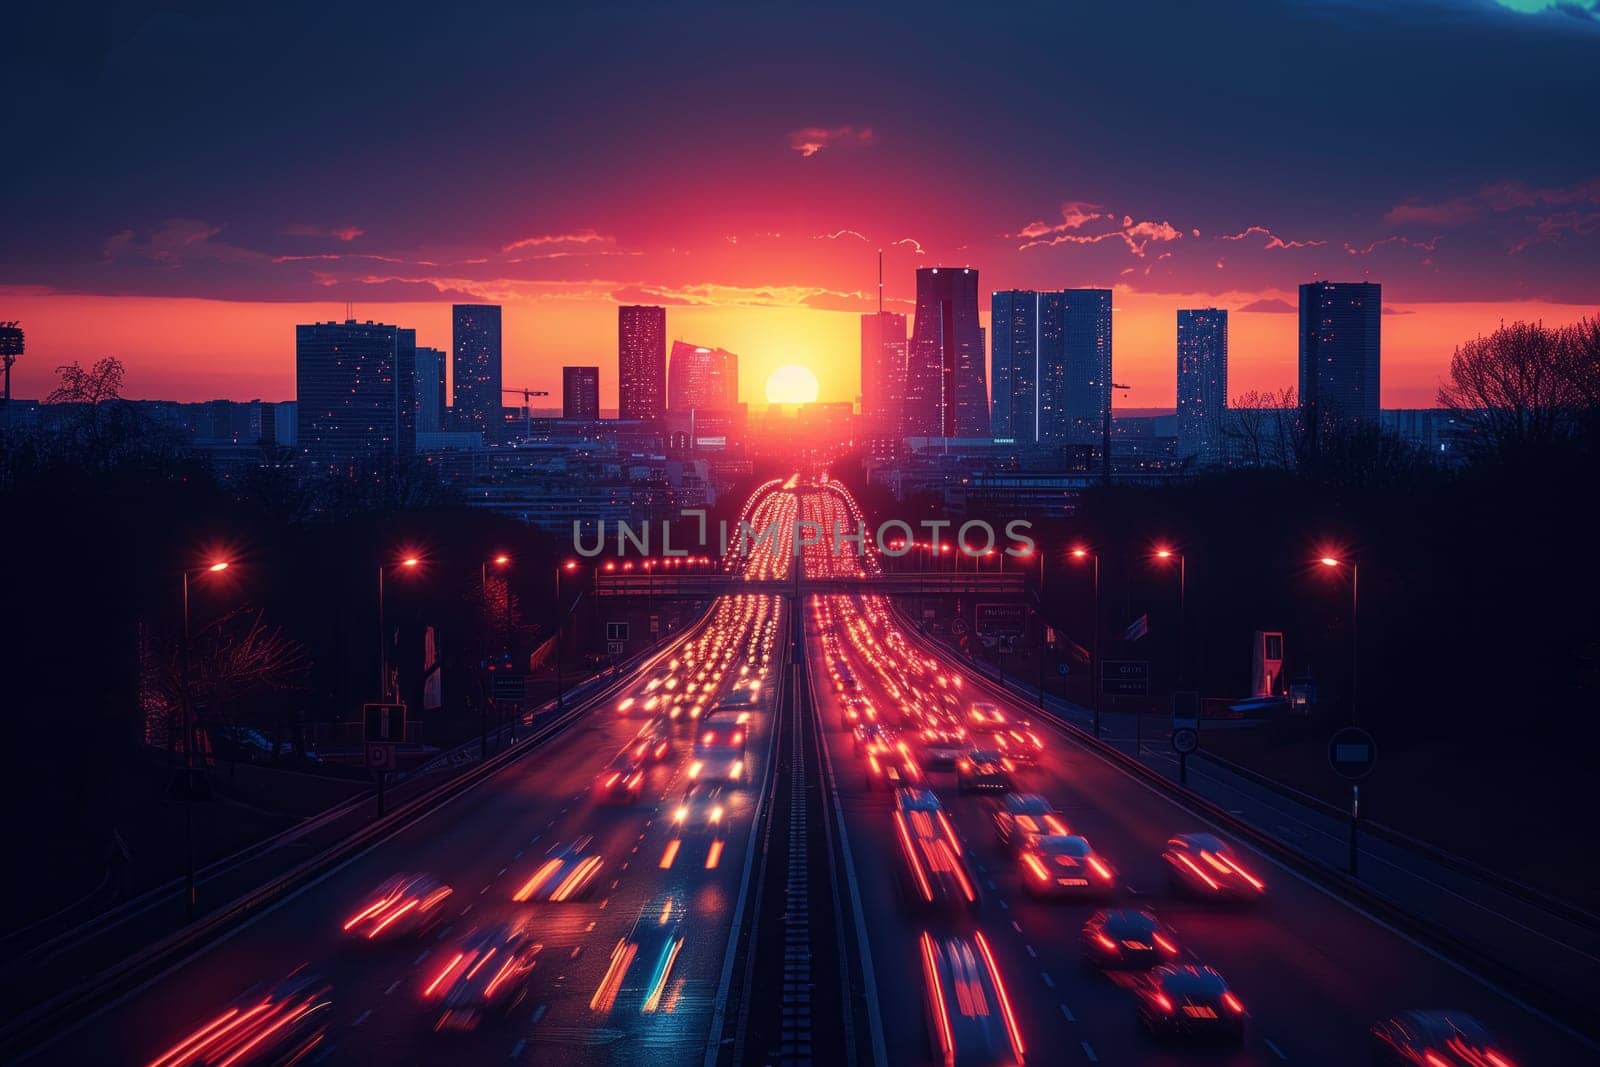 A highway stretching towards the city skyline at dusk, with towering buildings and a vibrant sky in the background creating a stunning metropolitan landscape